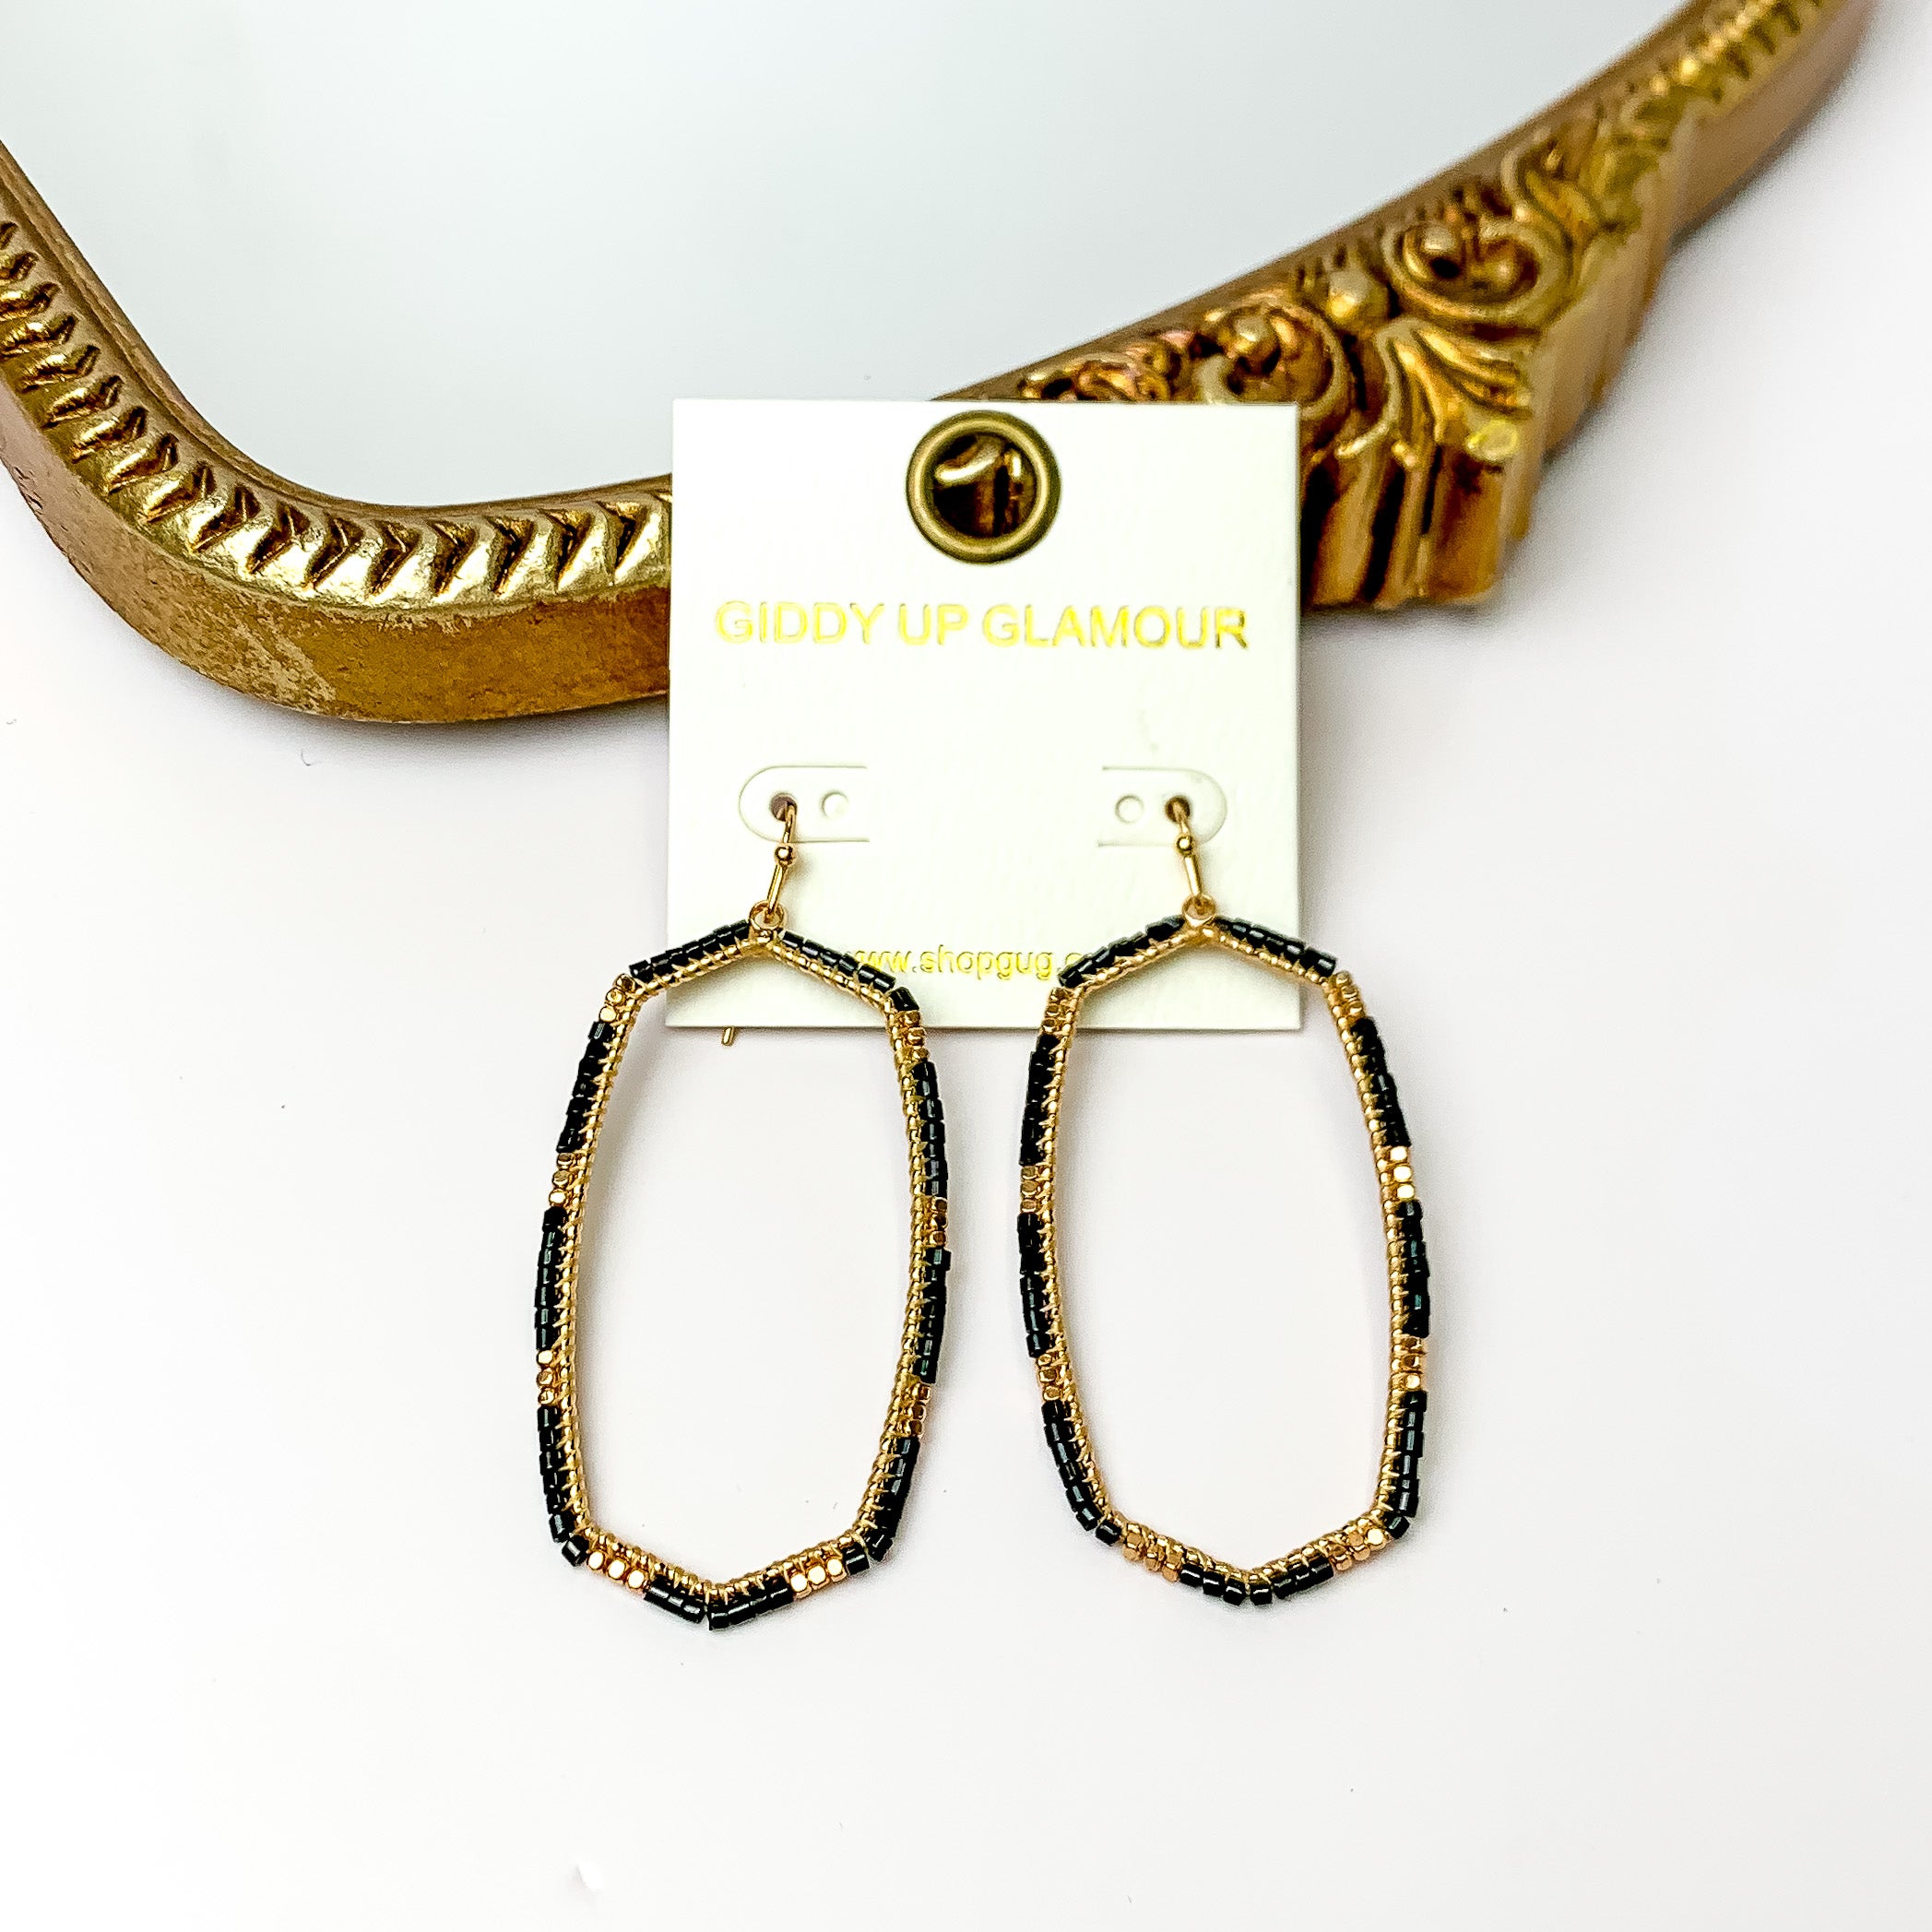 Black Beaded Open Large Drop Earrings with Gold Tone Accessory. Pictured on a white background with a gold frame through.